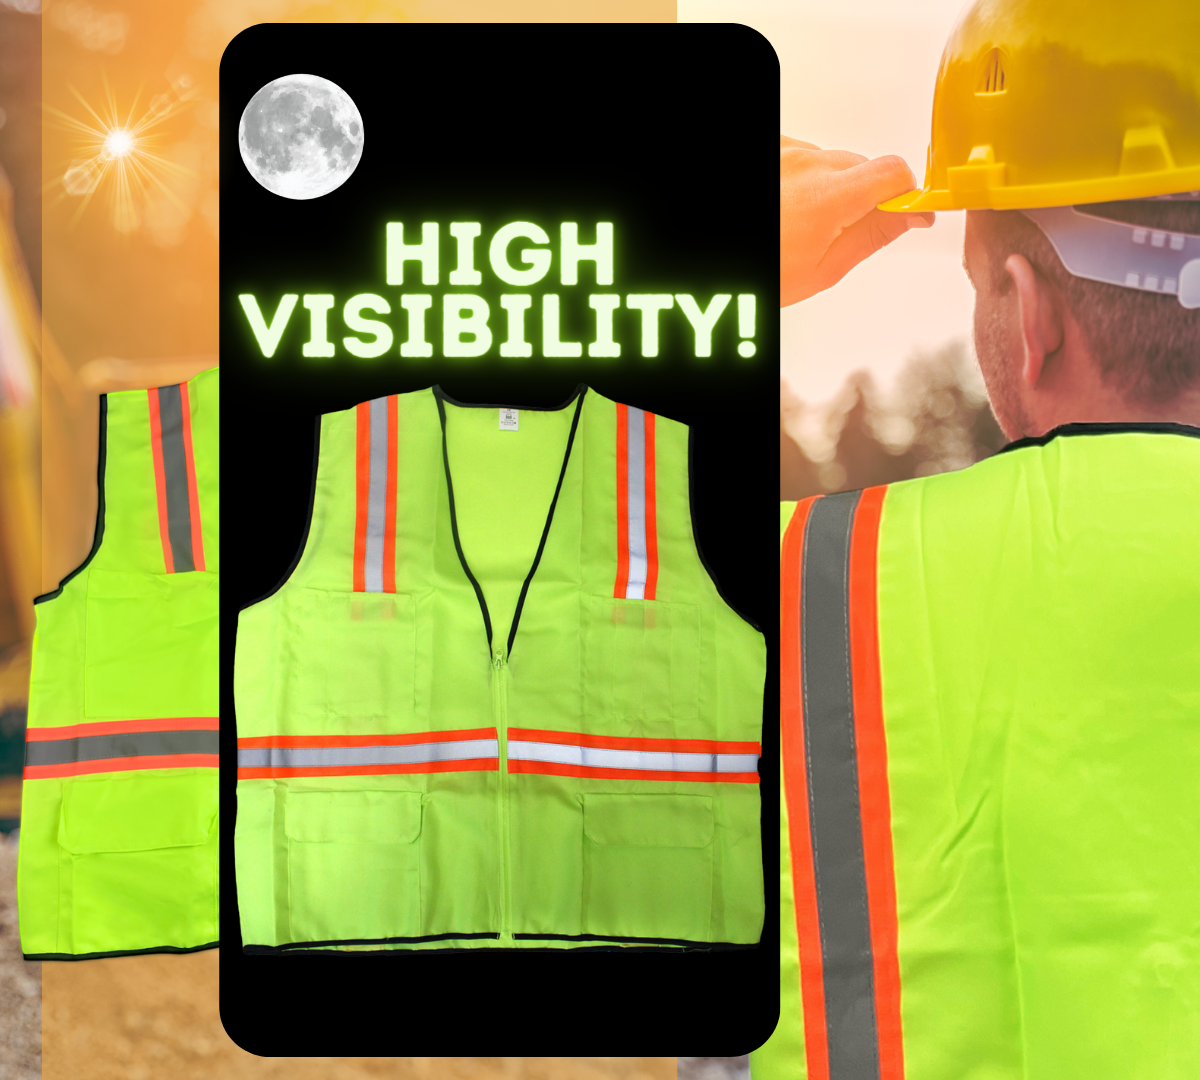 Bright Neon Green Safety Vest With Reflective Stripes Adult Size 5X Large  - SF-33718